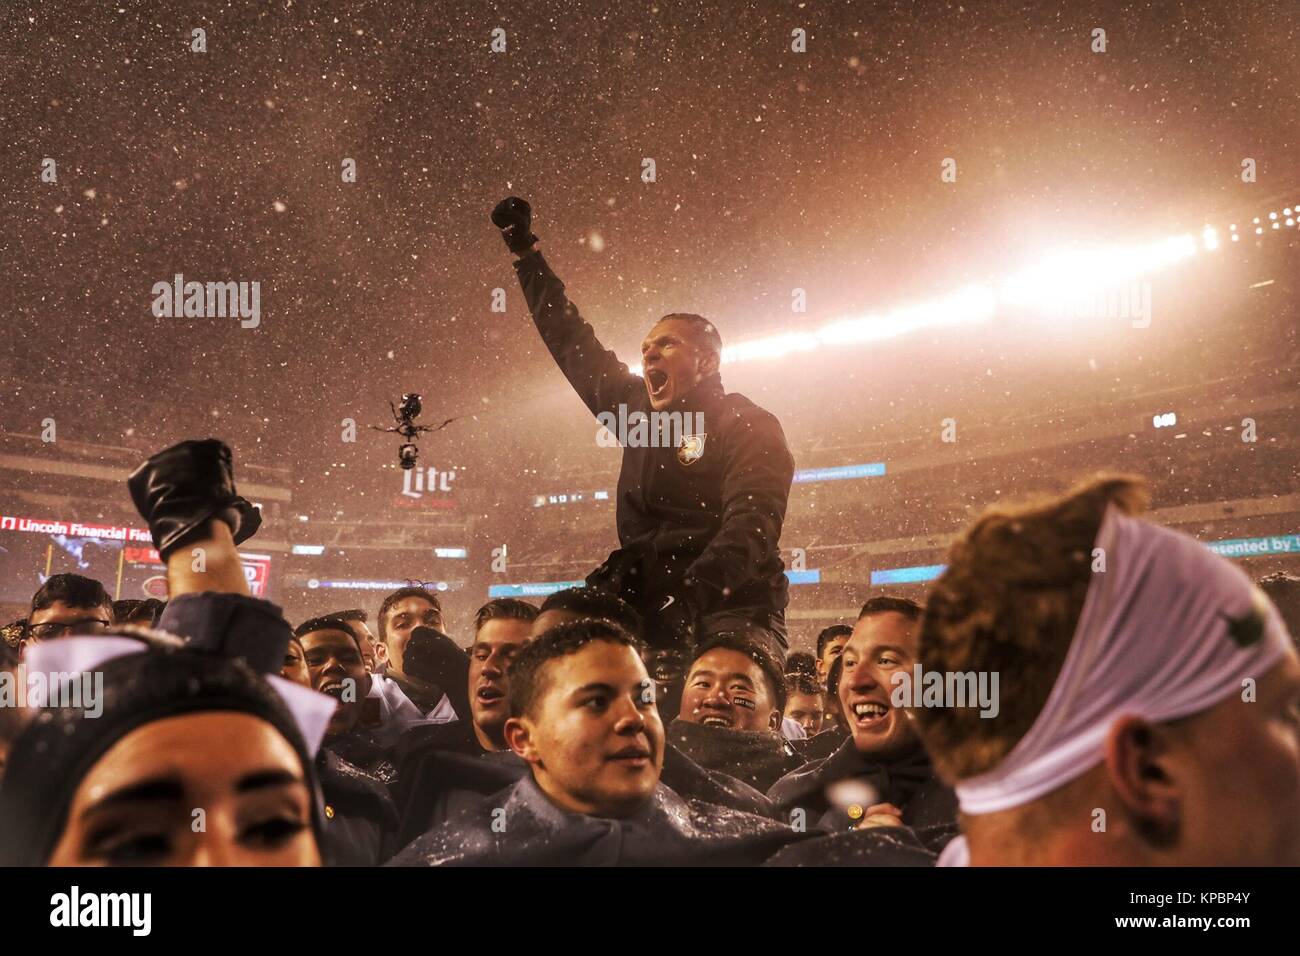 U.S. Army Black Knights football players hoist up head coach Jeff Monken after a victory during the U.S. Army Military Academy at West Point Black Knights versus U.S. Naval Academy Navy Midshipmen football game at the Lincoln Financial Field December 9, 2017 in Philadelphia, Pennsylvania. Stock Photo